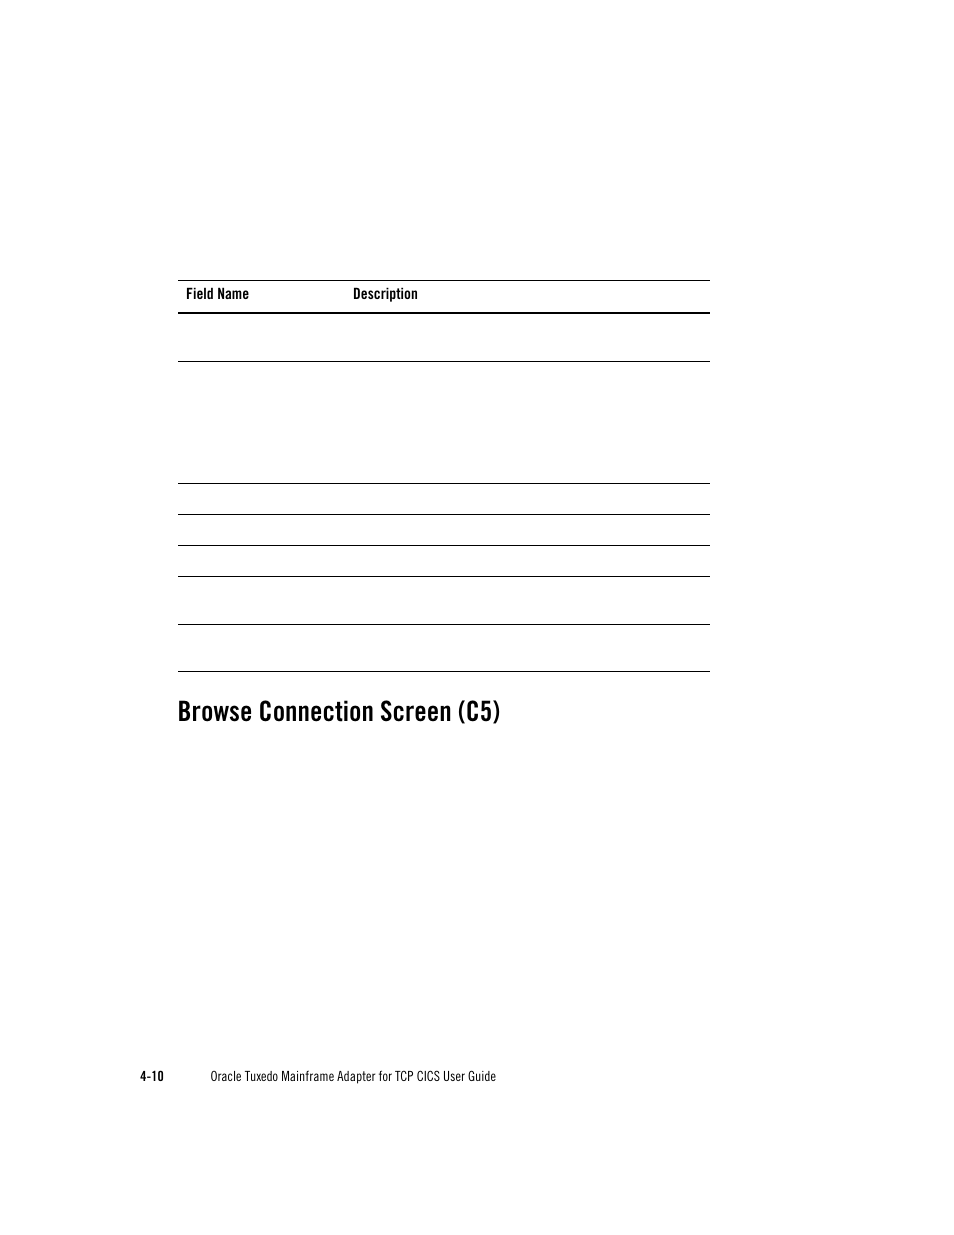 Browse connection screen (c5) | Oracle Audio Technologies Oracle Tuxedo User Manual | Page 44 / 112